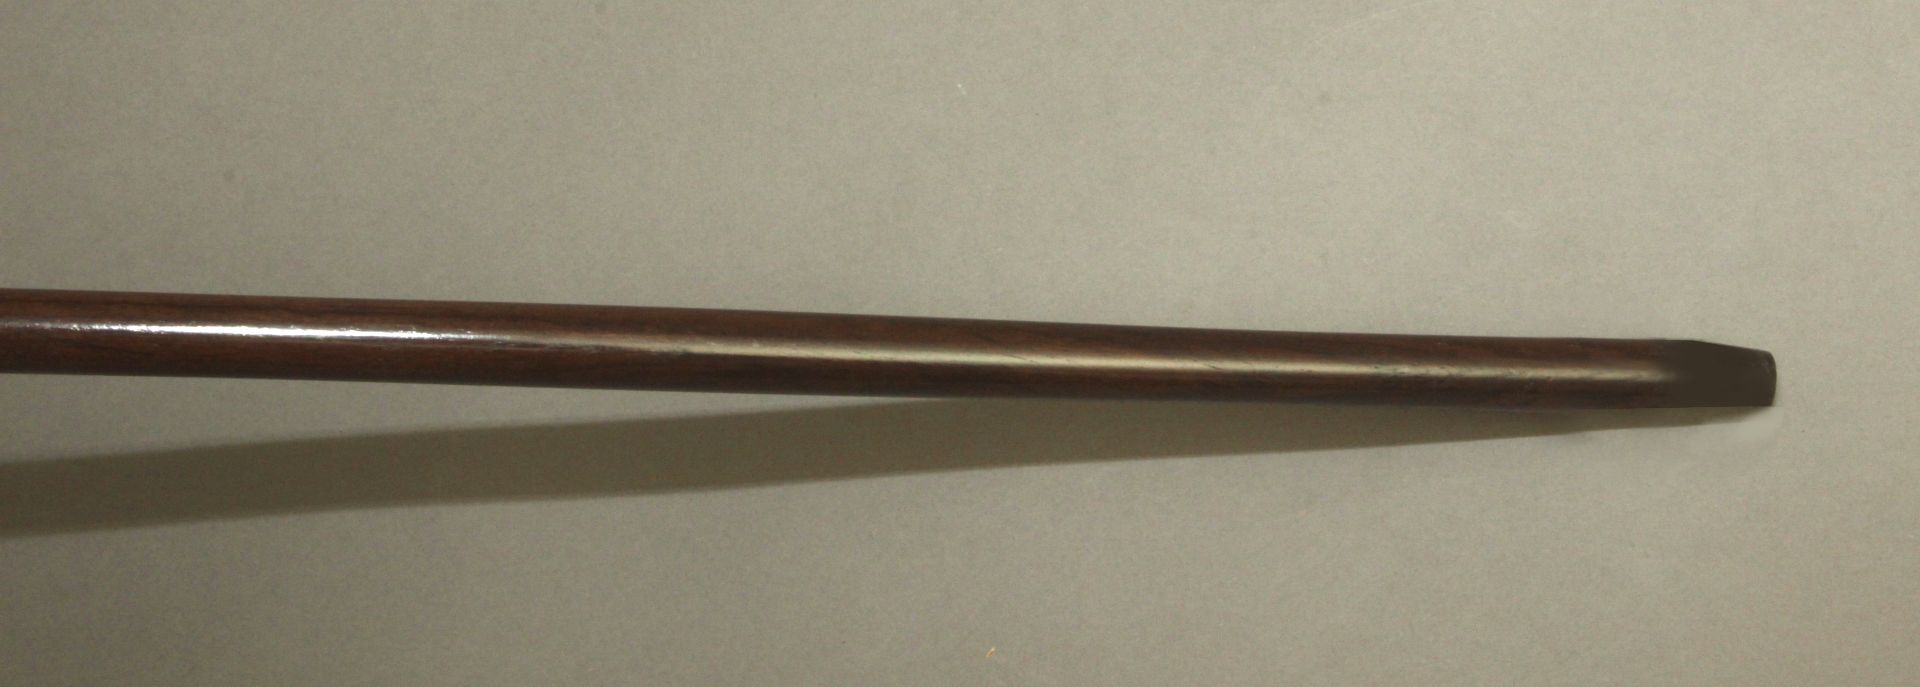 A 19th century probably English walking stick - Image 6 of 11